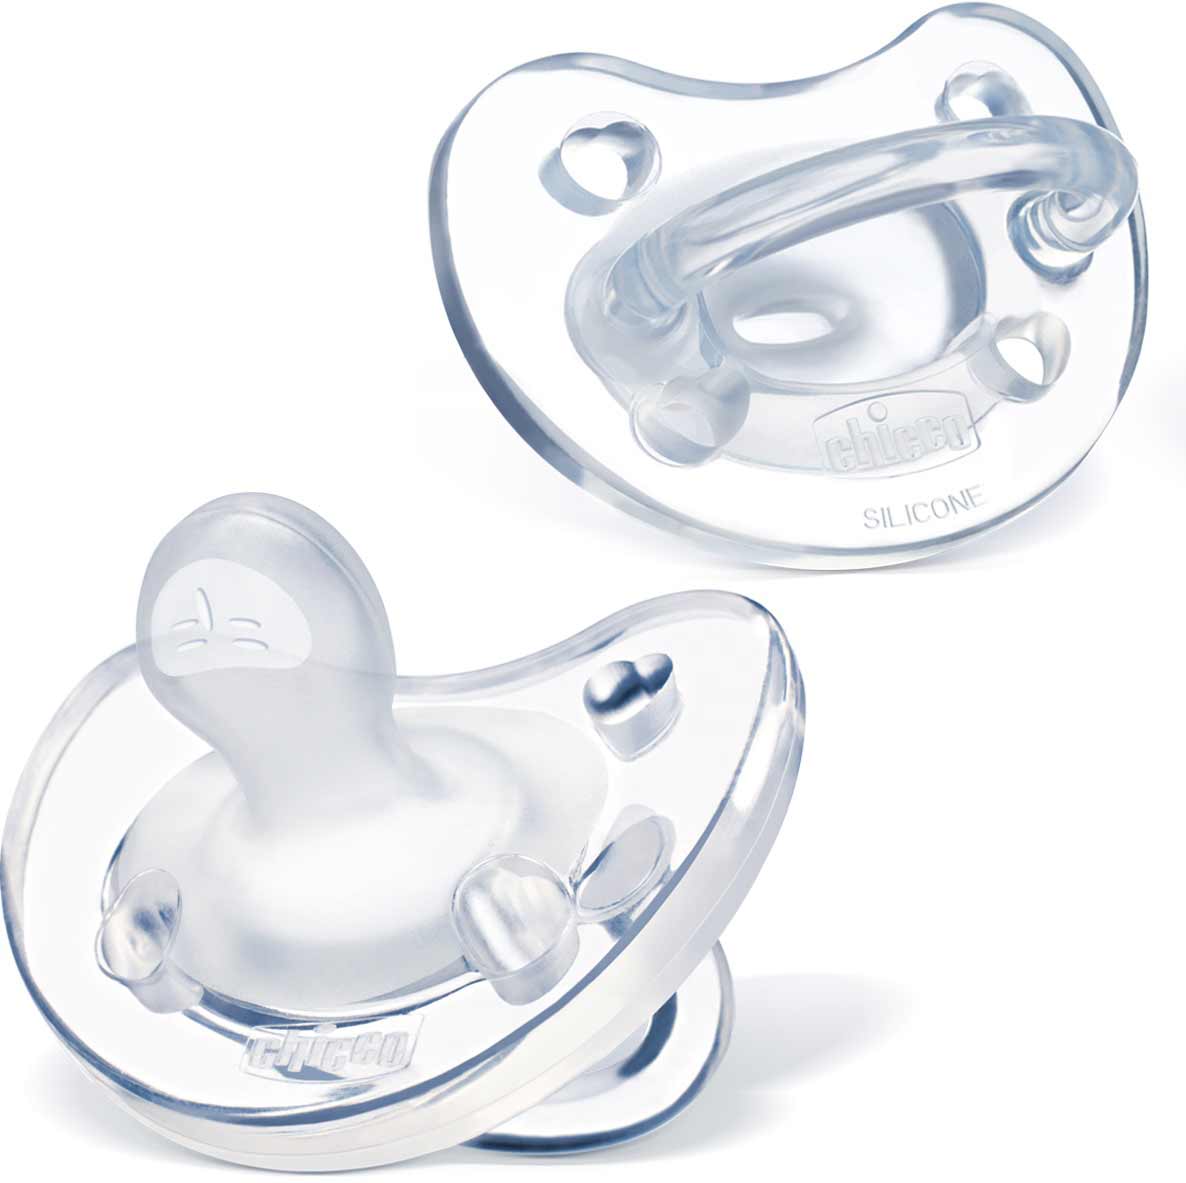 https://www.chiccousa.com/on/demandware.static/-/Sites-Chicco-Library/default/dwa644cb69/images/baby-talk/pacifier-2-physioforma-pacifiers-clear.jpg